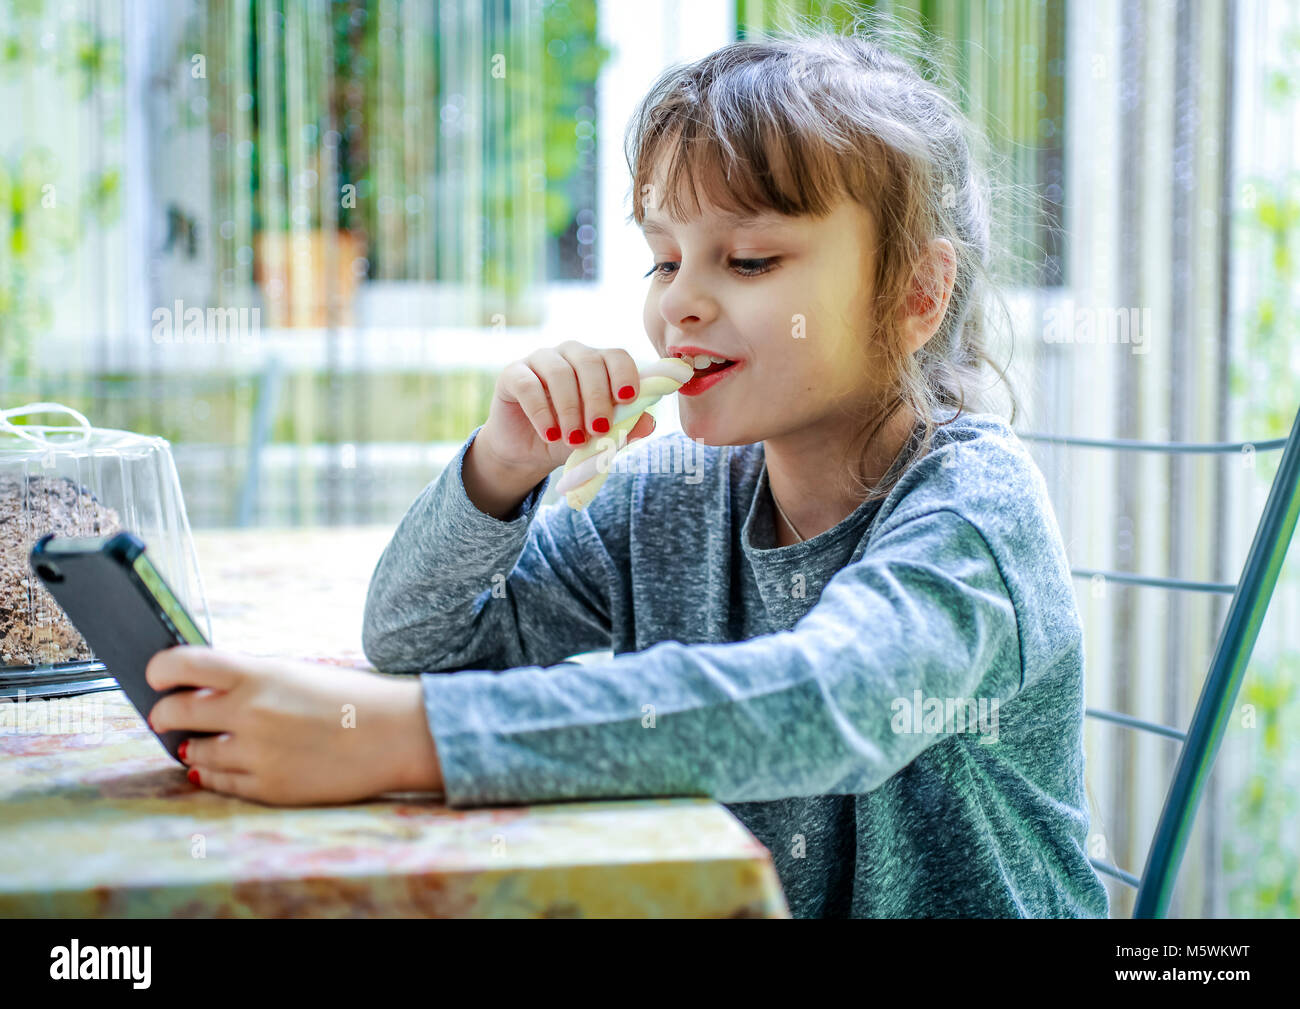 Little girl eating candy and looking at mobile phone Stock Photo